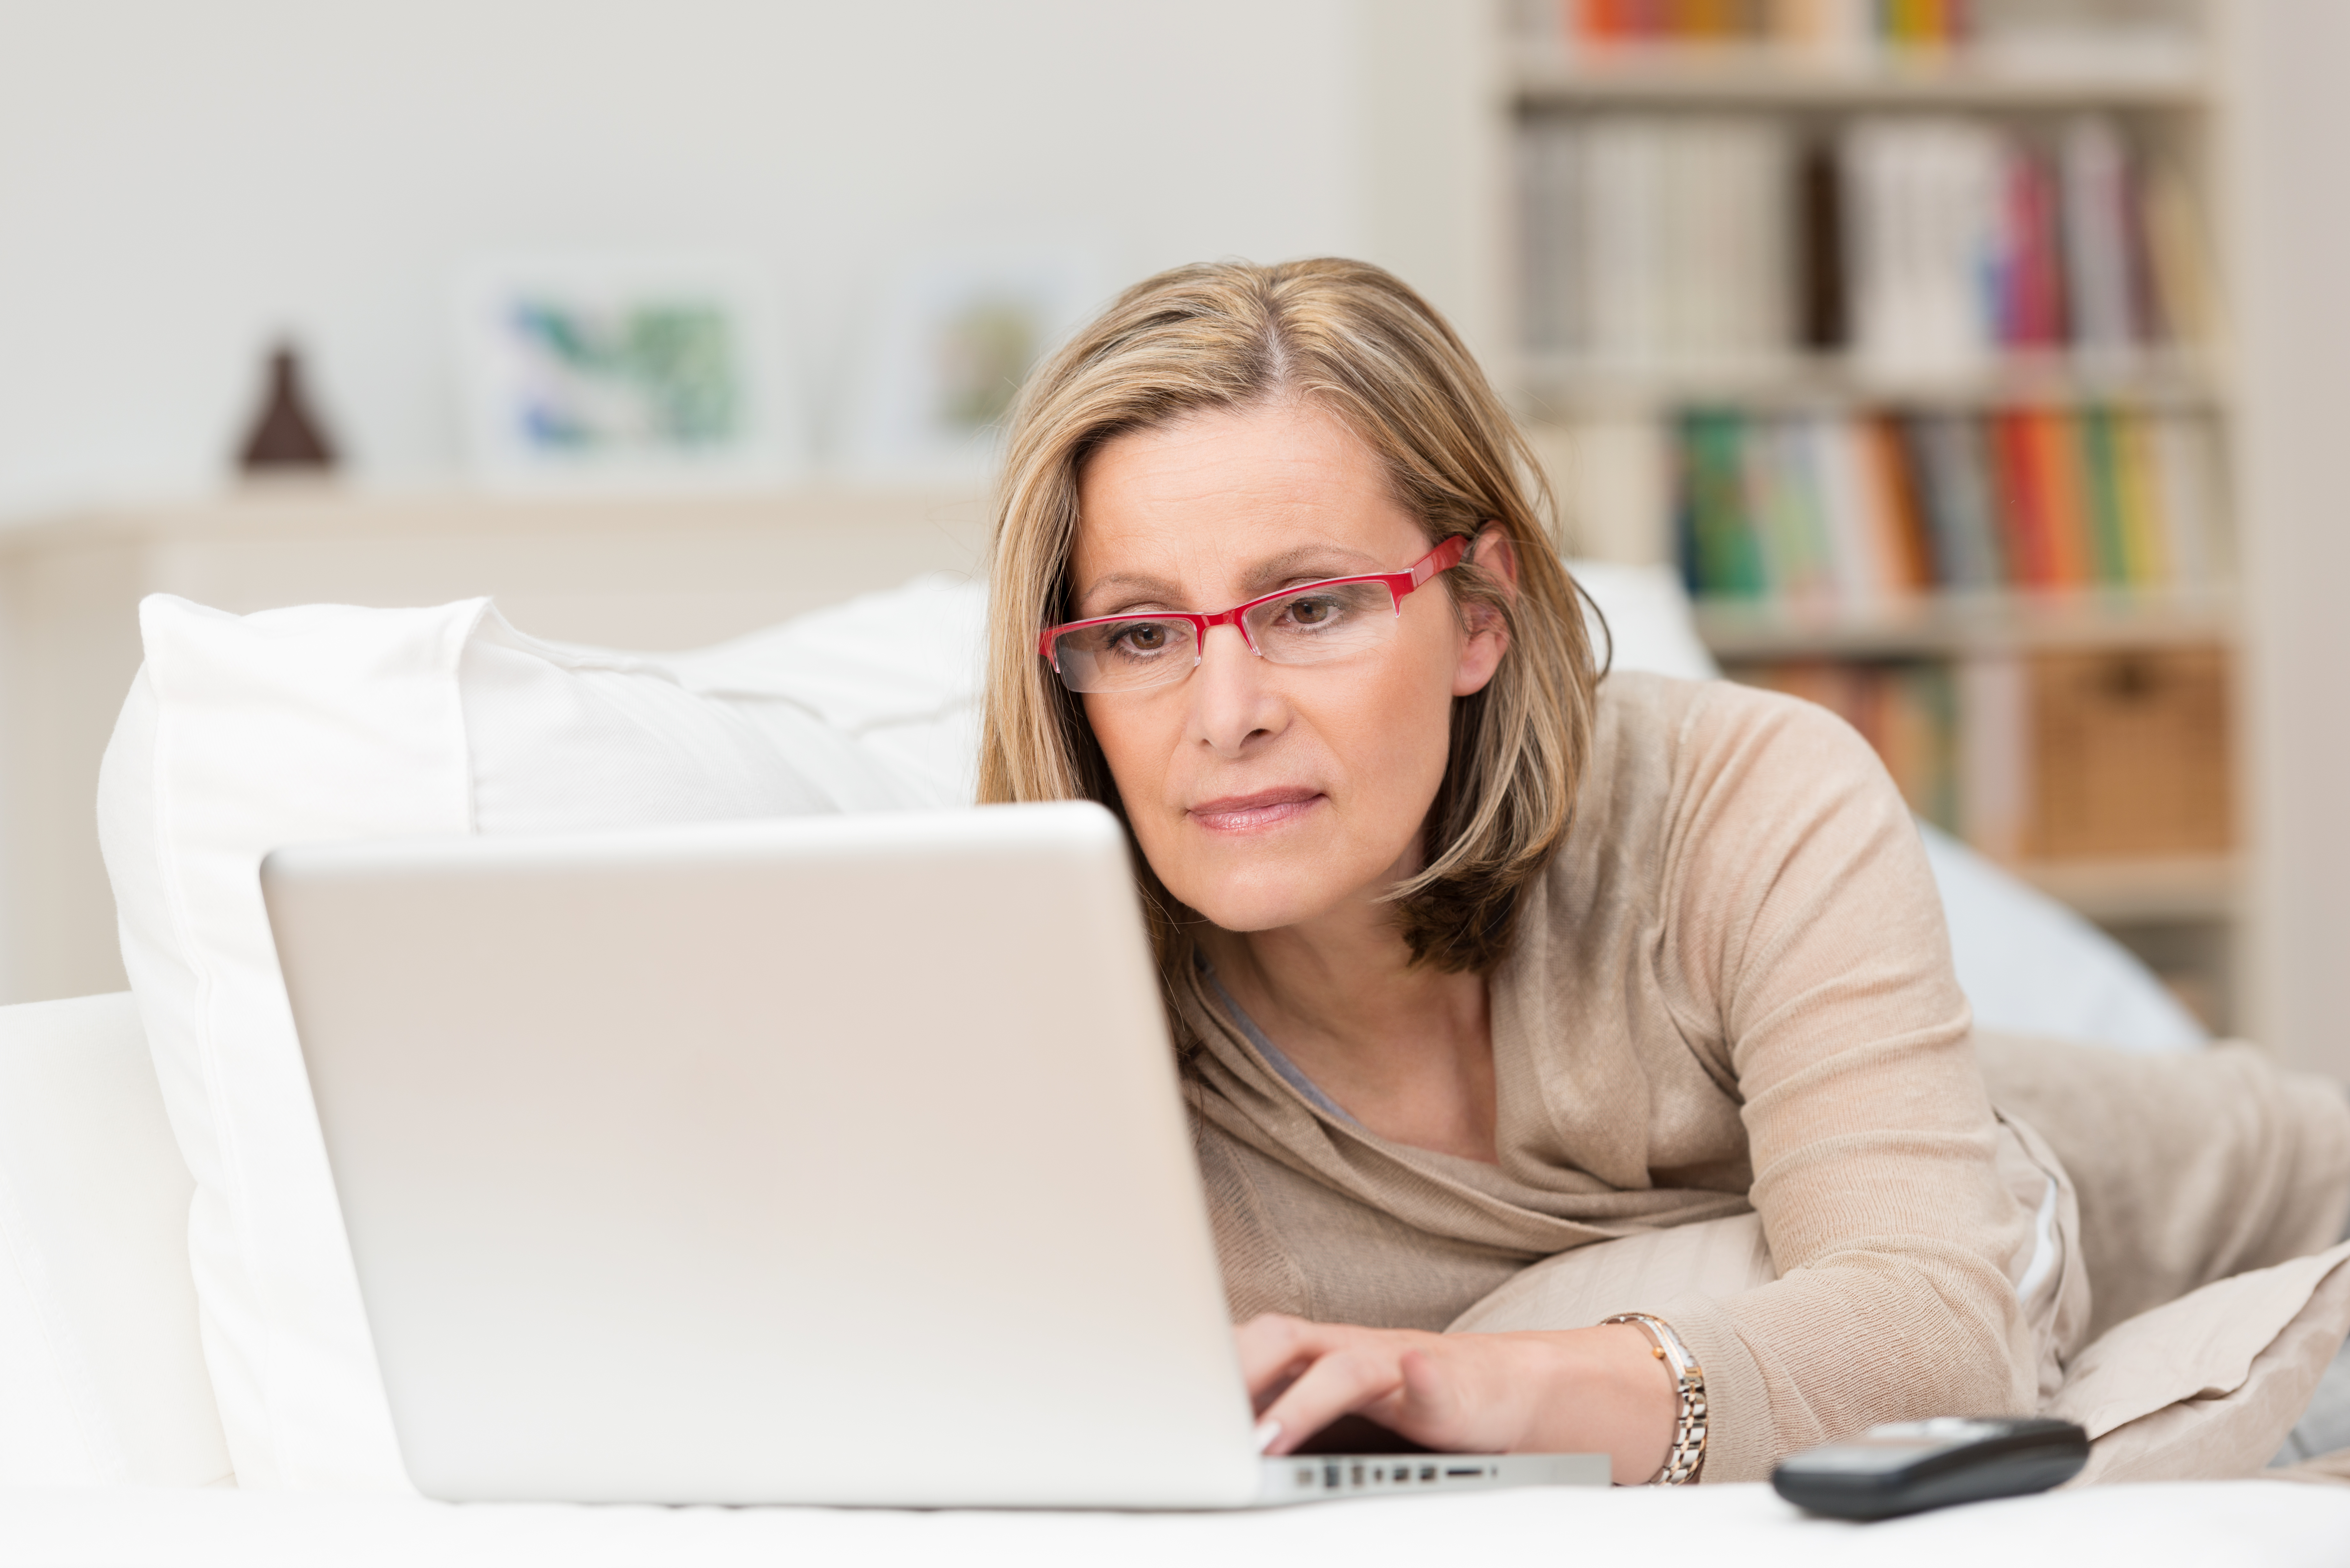 Middle-aged woman working on a laptop | Source: Shutterstock